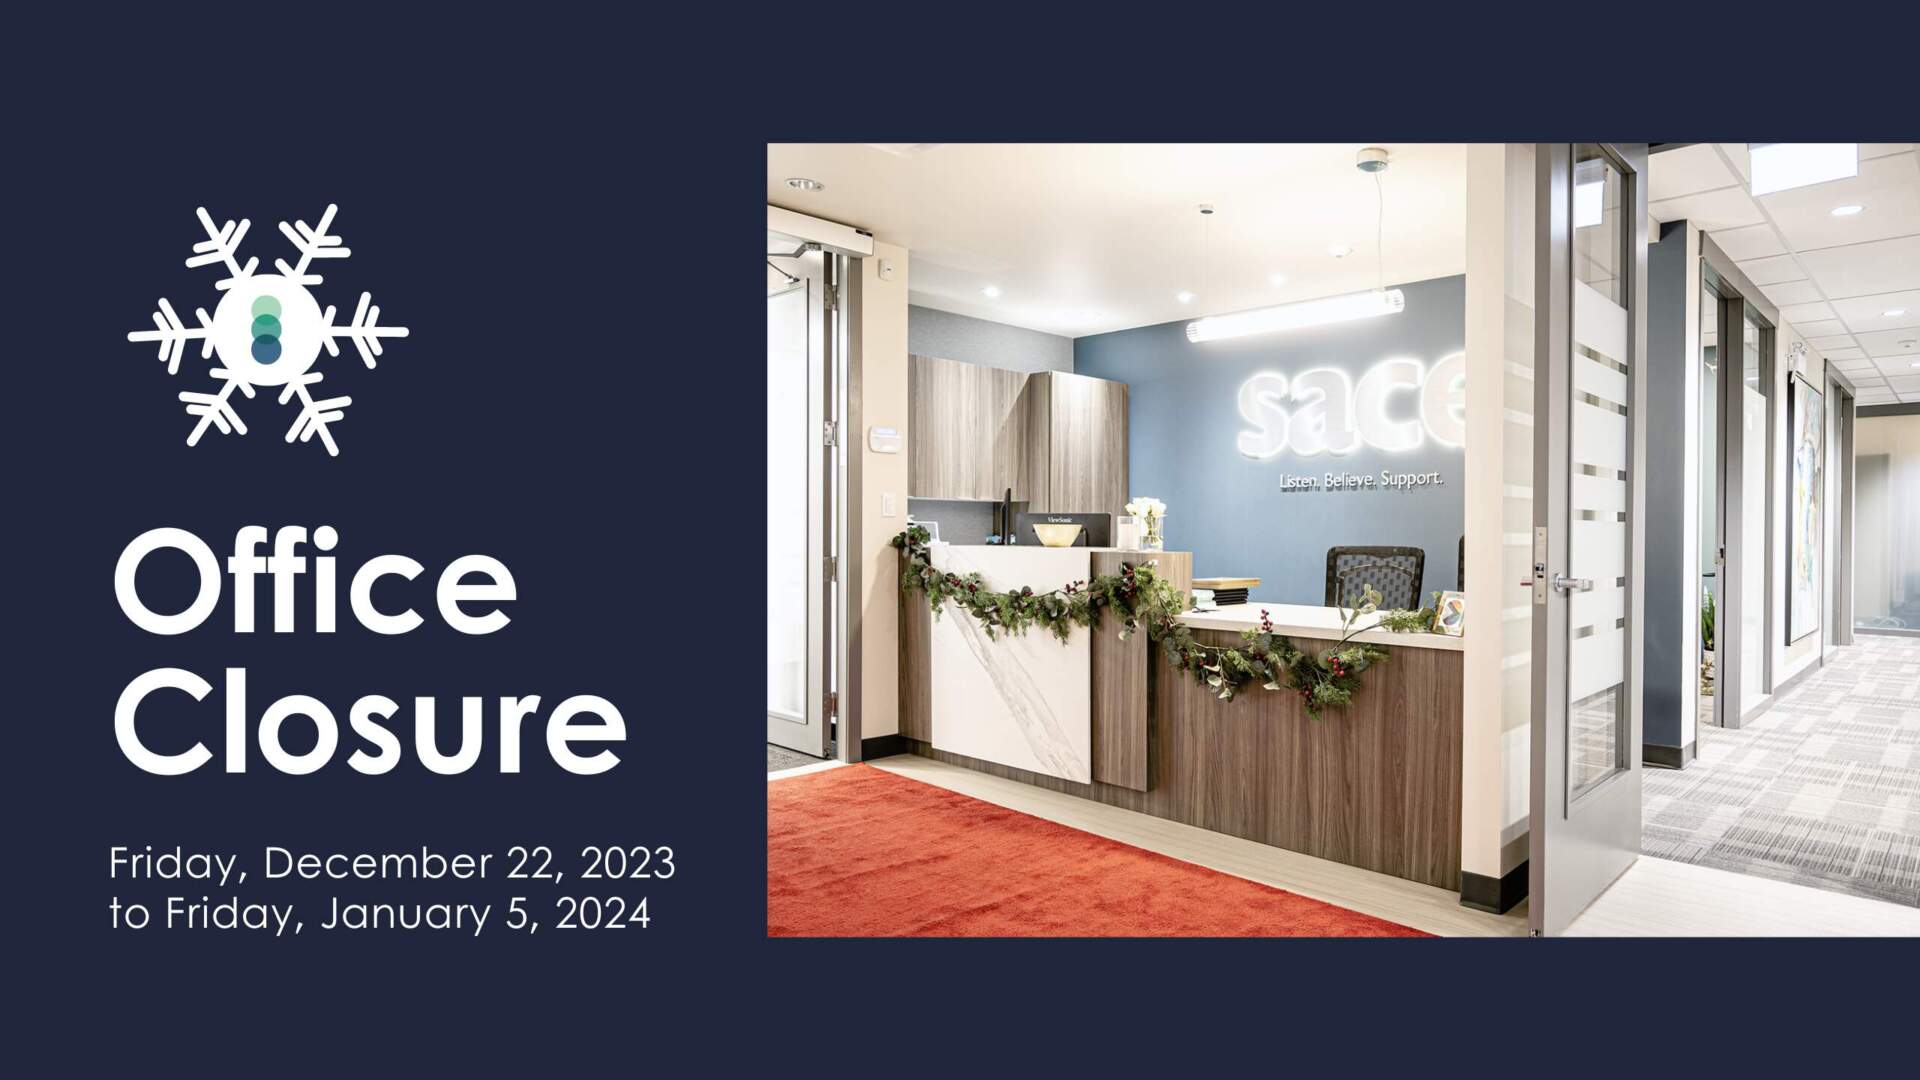 Dark banner with a photo of the SACE reception desk with SACE sign on a blue wall, holiday decorations, and a red carpet. The SACE circle logo is centred in a snowflake design and text says "Office Closure Friday, December 22, 2023 to Friday, January 5, 2024"